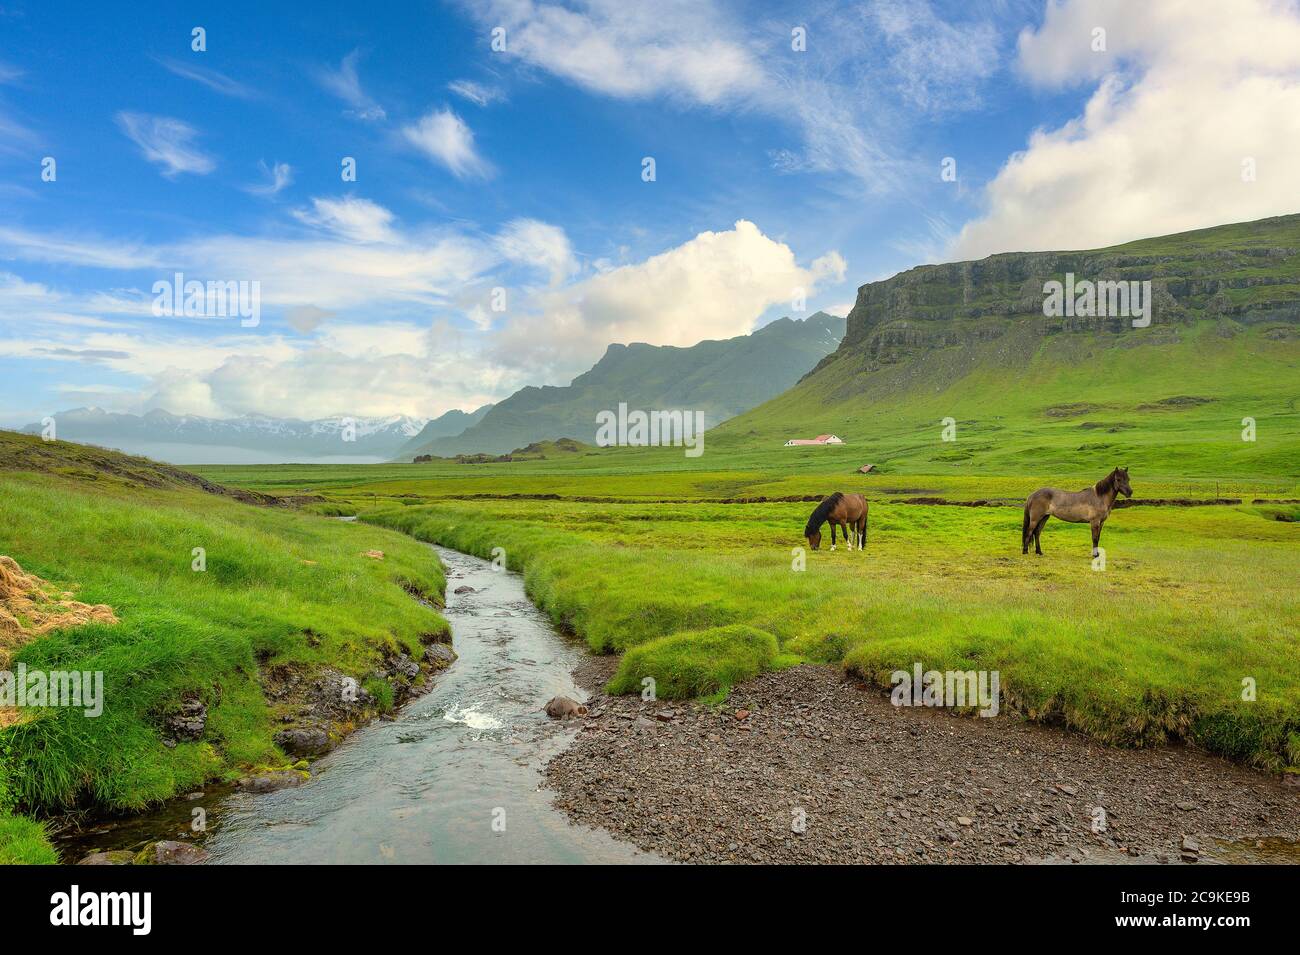 The Icelandic country farm has two horses standing in a green field, a stream and a beautiful mountain background. The atmosphere is refreshing and pe Stock Photo